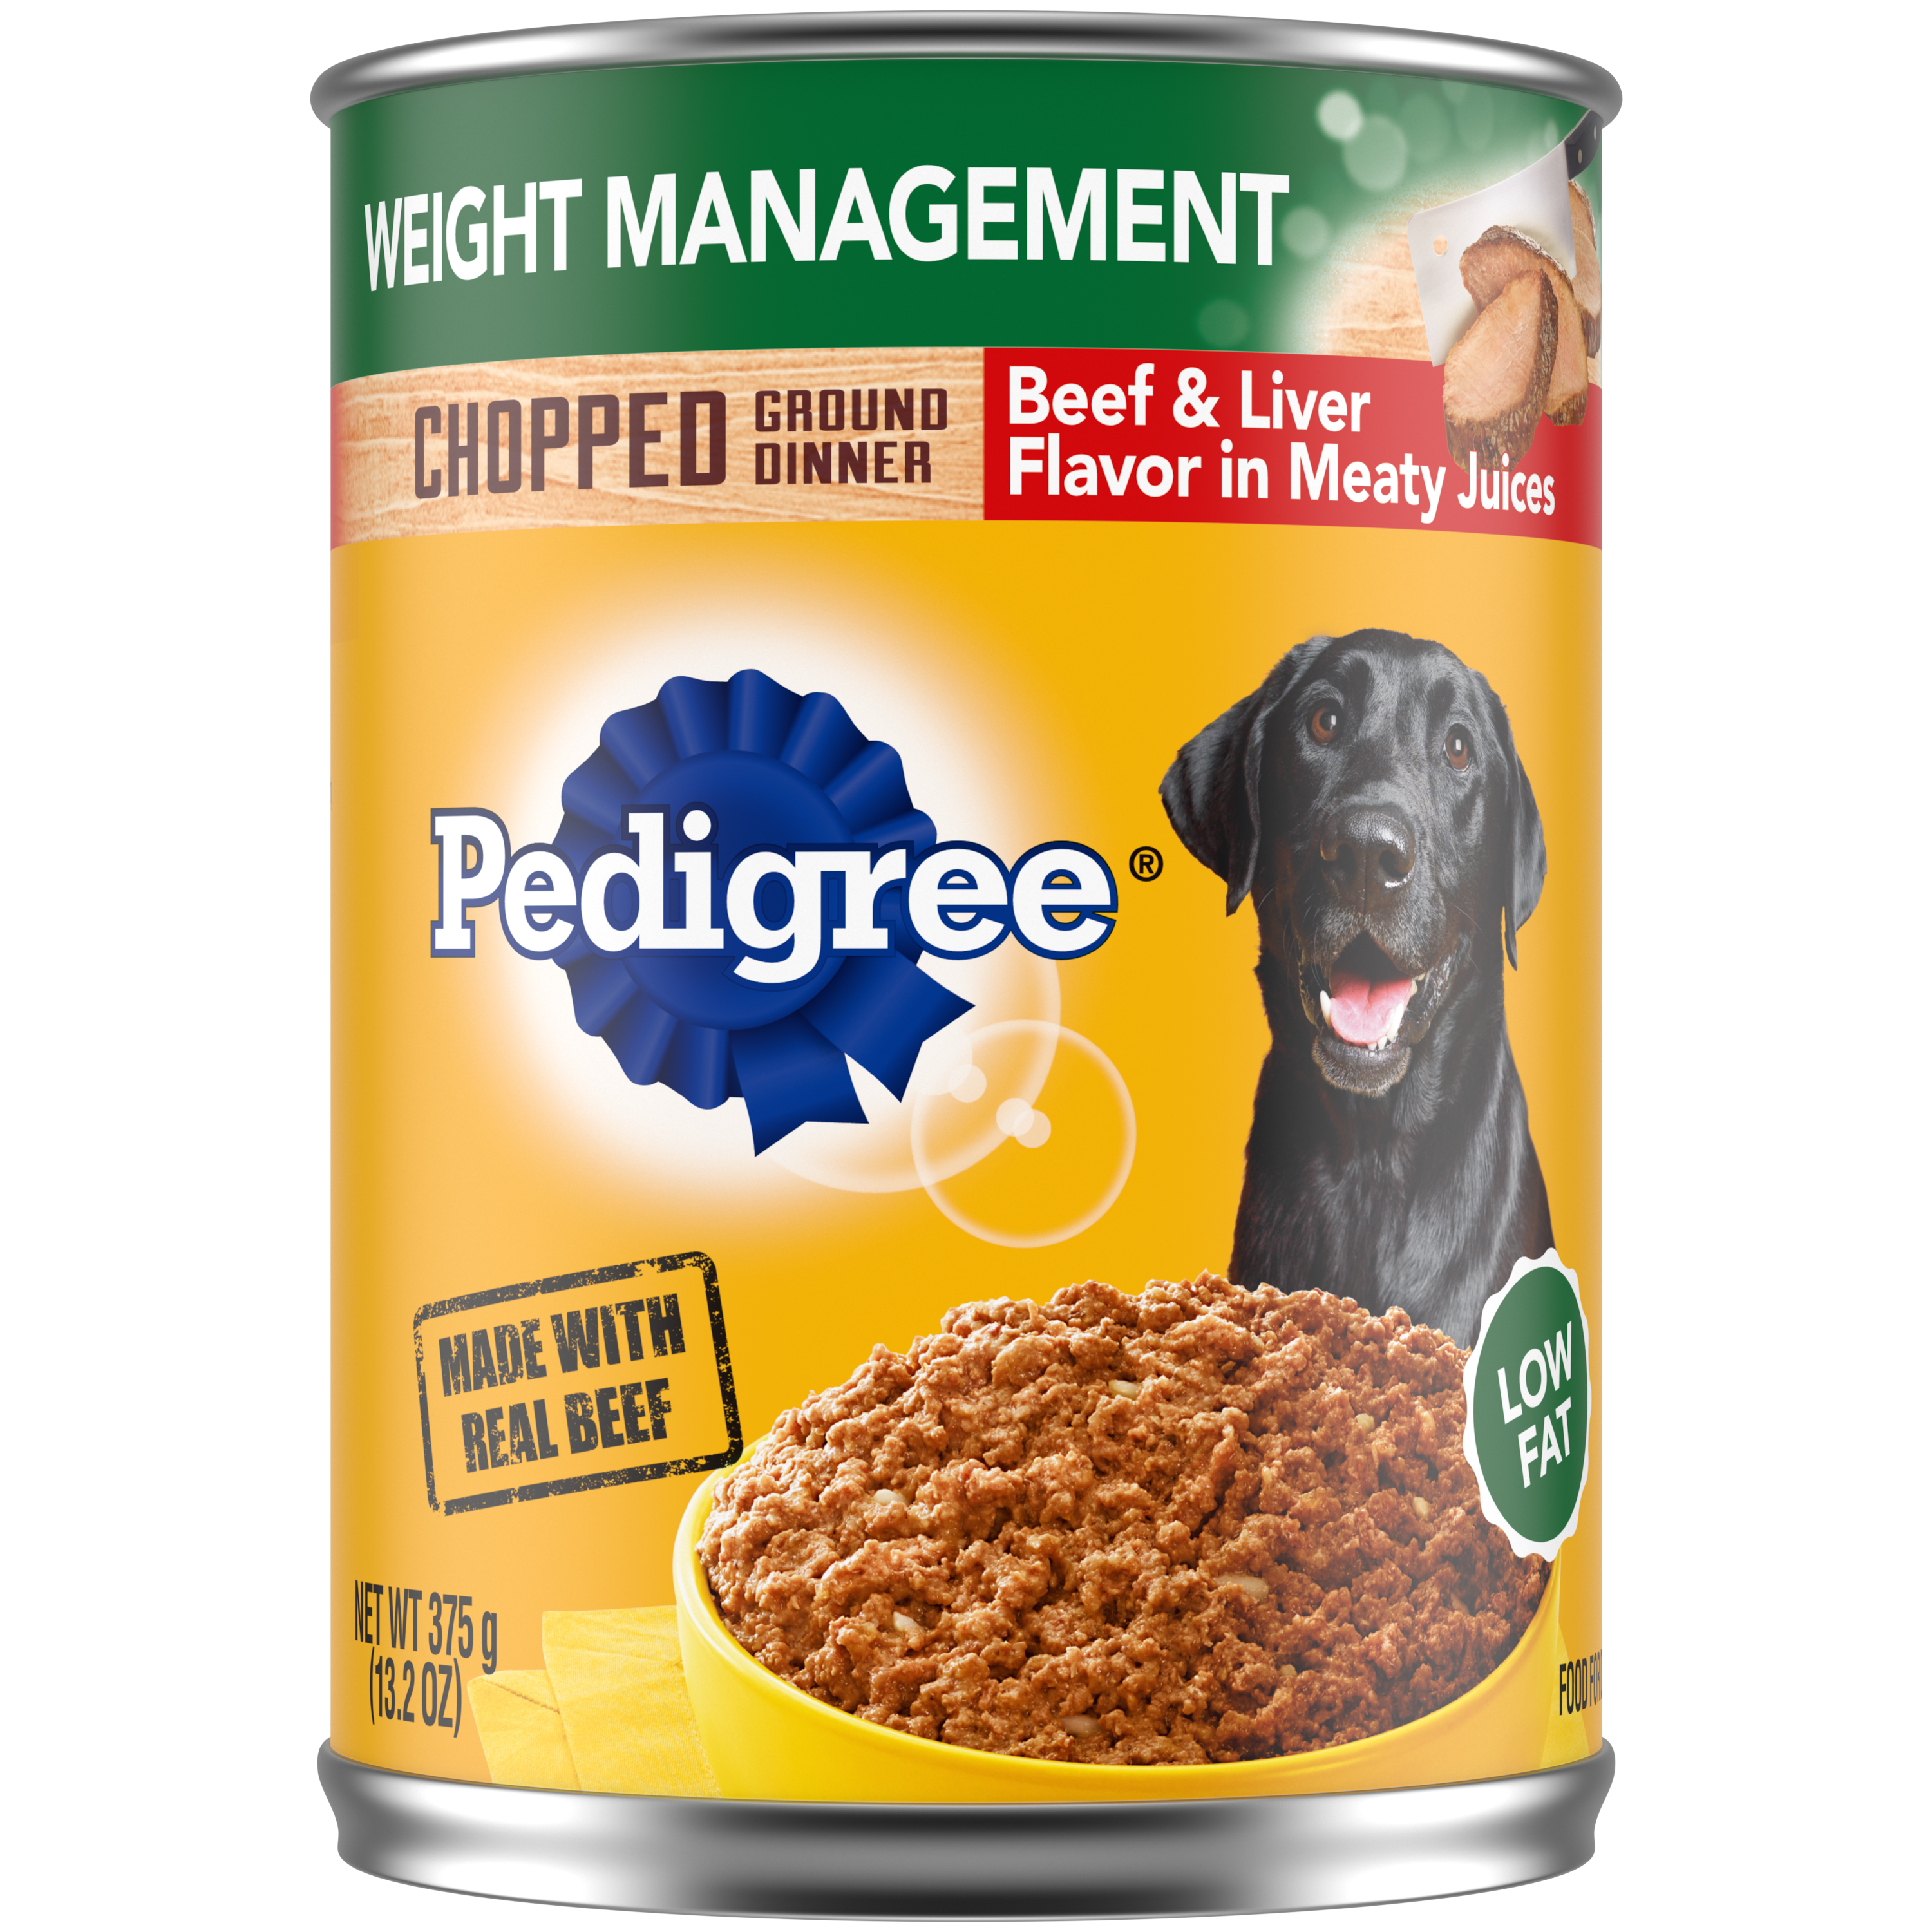 PEDIGREE Weight Management Adult Canned Wet Dog Food for Weight Control Chopped Ground Dinner Beef & Liver Flavor - image 1 of 10